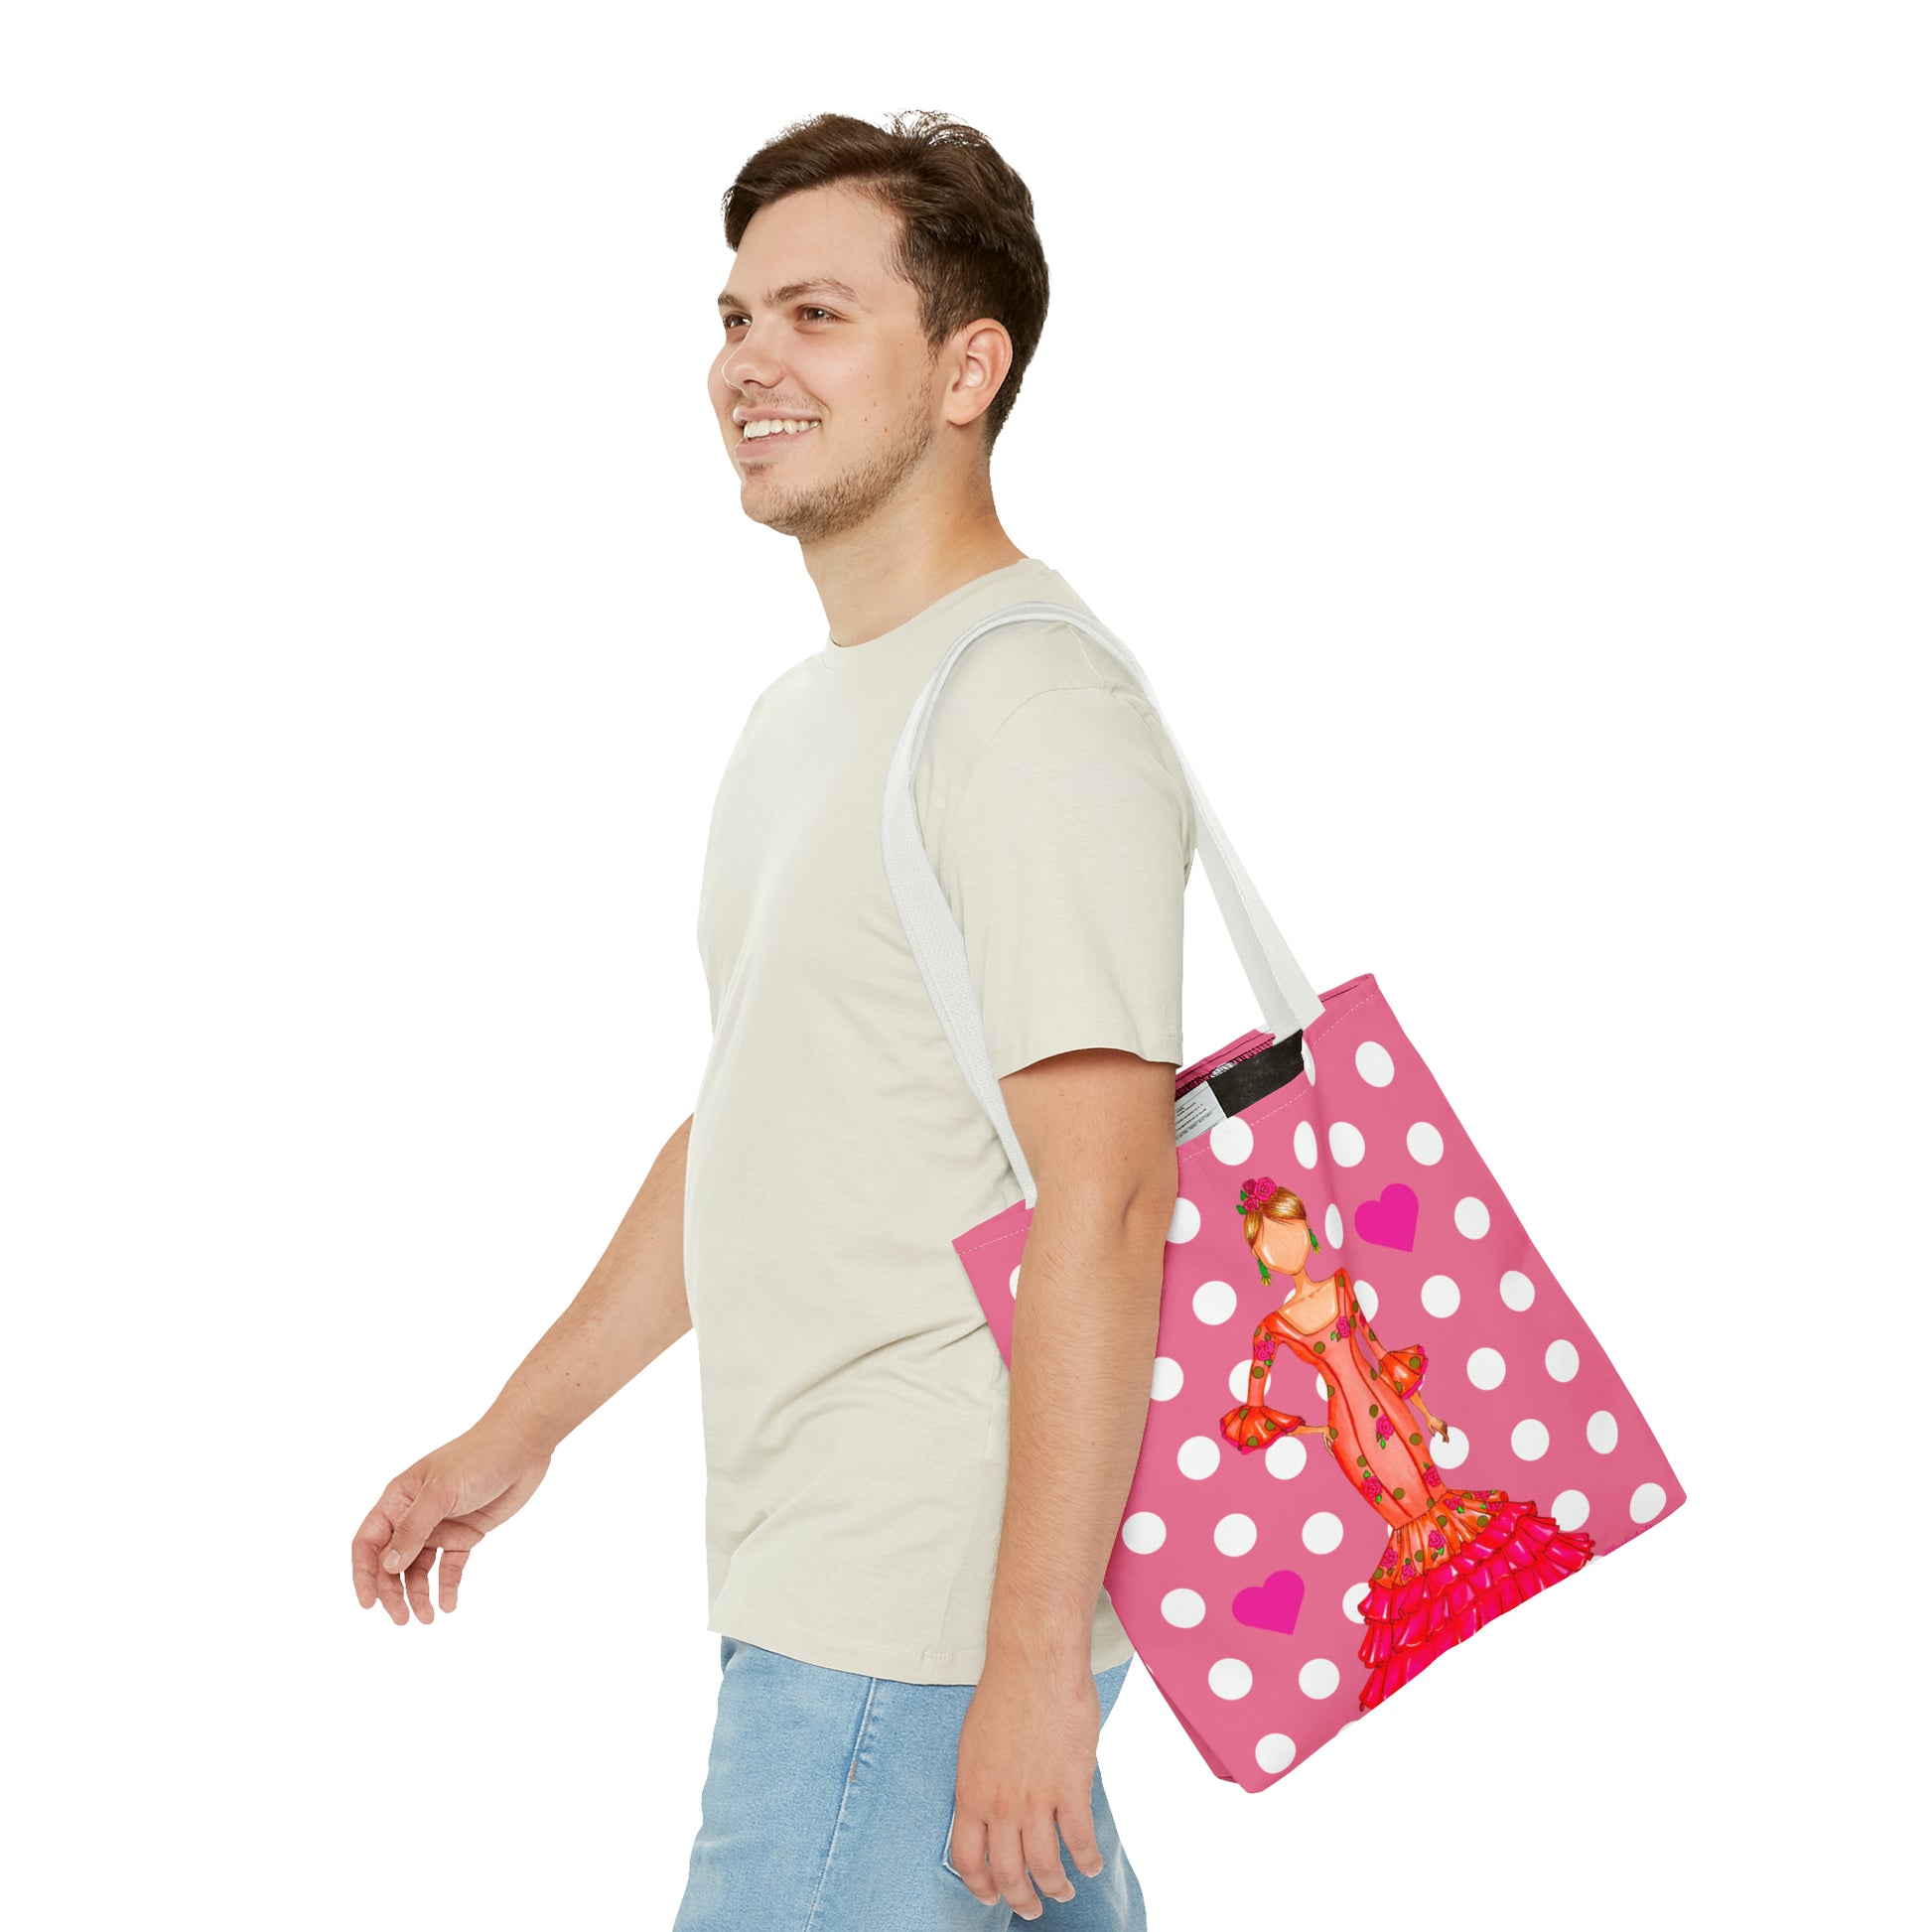 a man carrying a pink and white polka dot bag